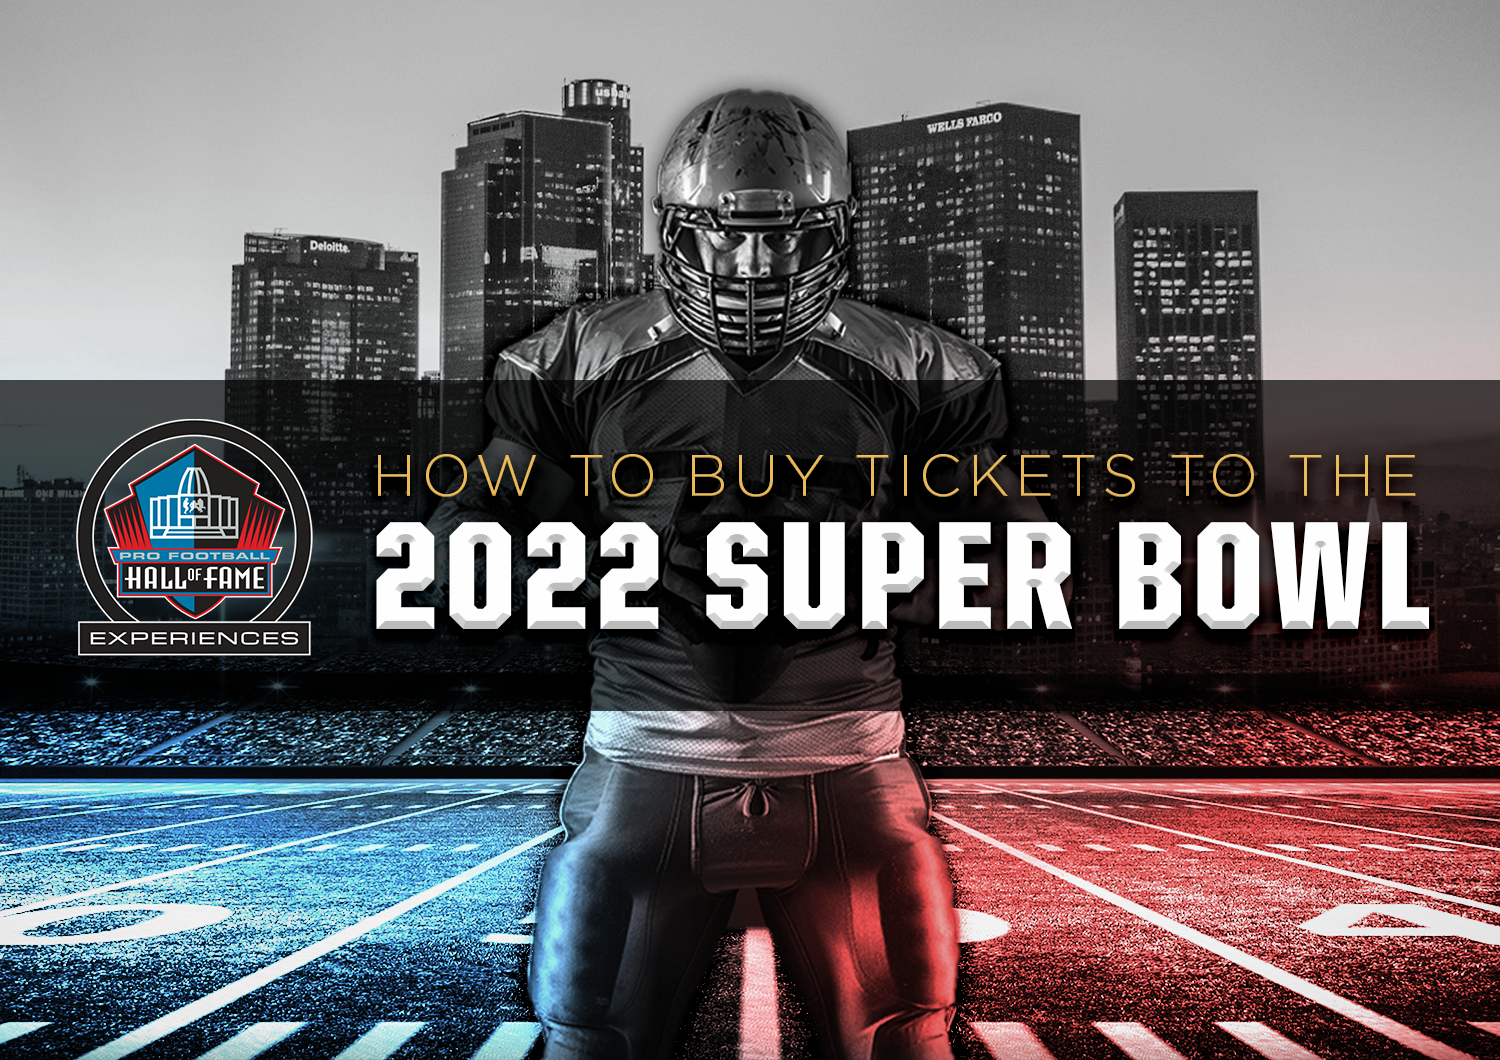 How to Buy 2022 Super Bowl Tickets Pro Football Hall of Fame